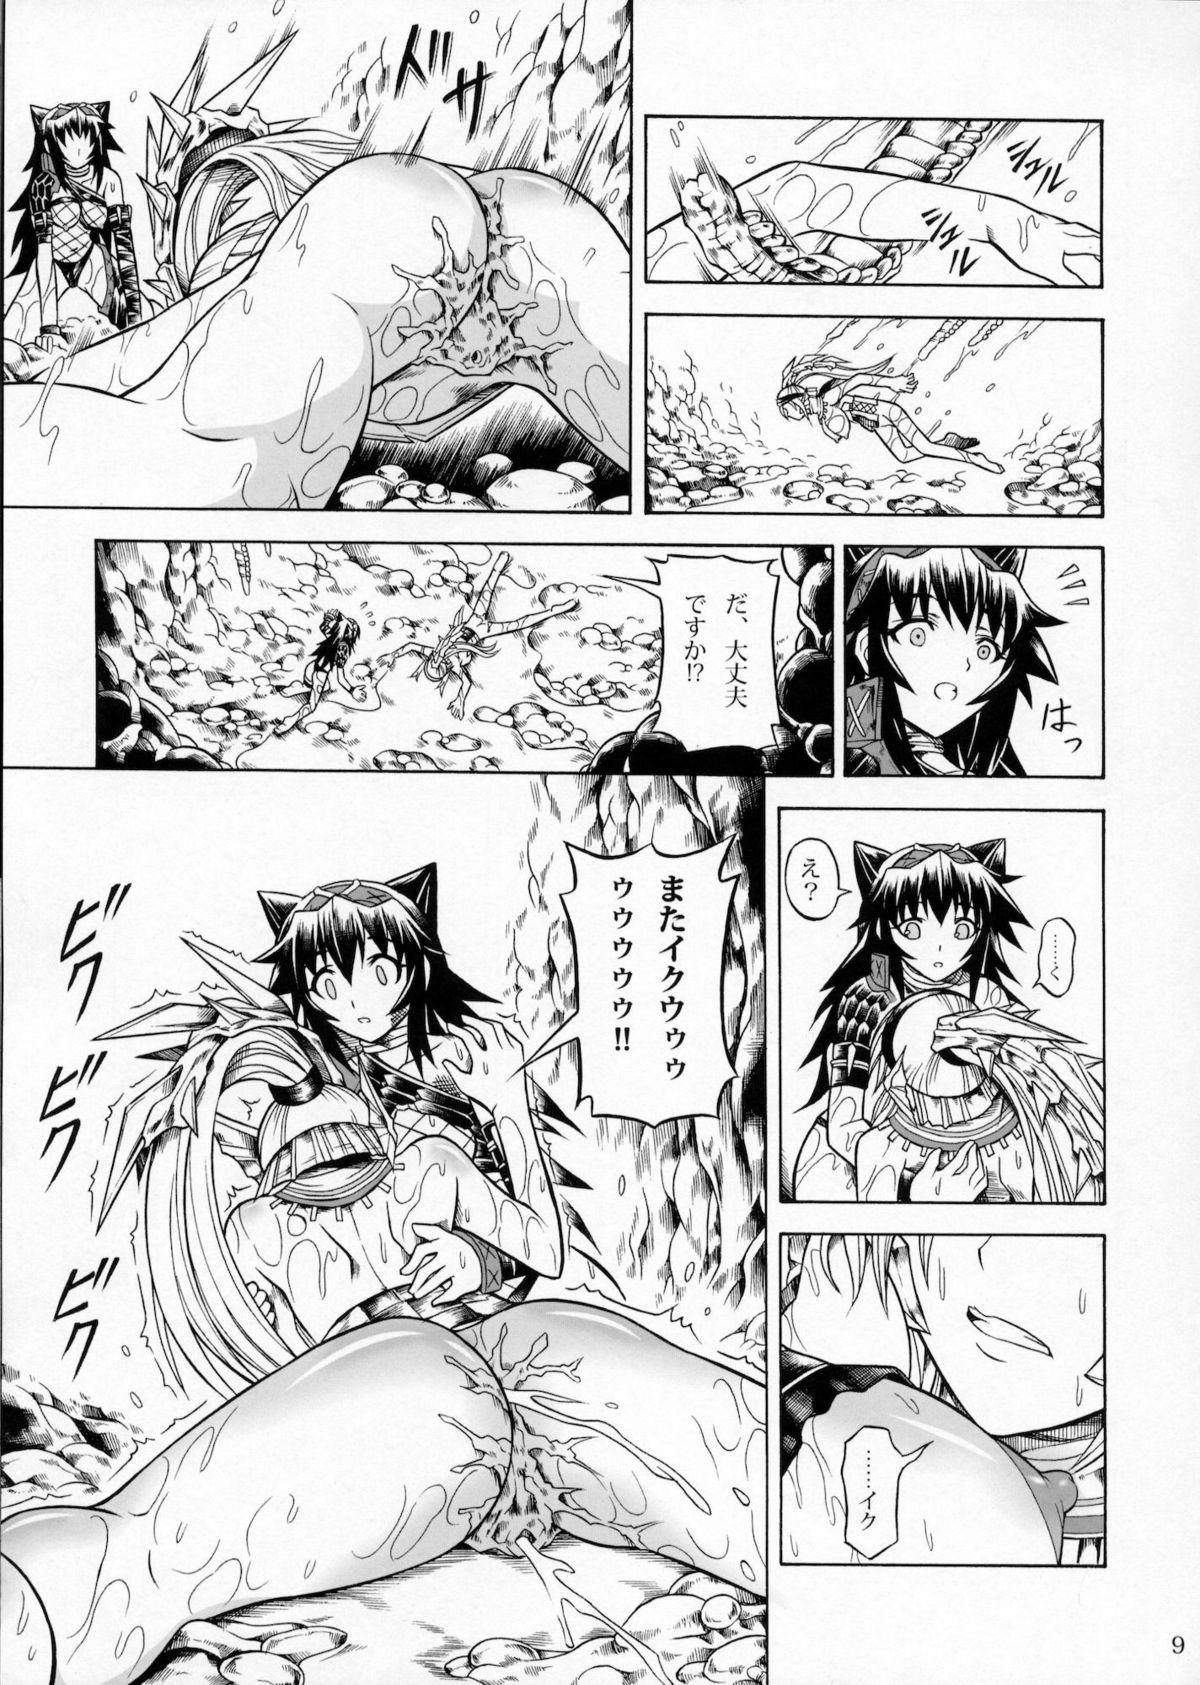 Web Solo Hunter no Seitai 2 The second part - Monster hunter Office Sex - Page 8